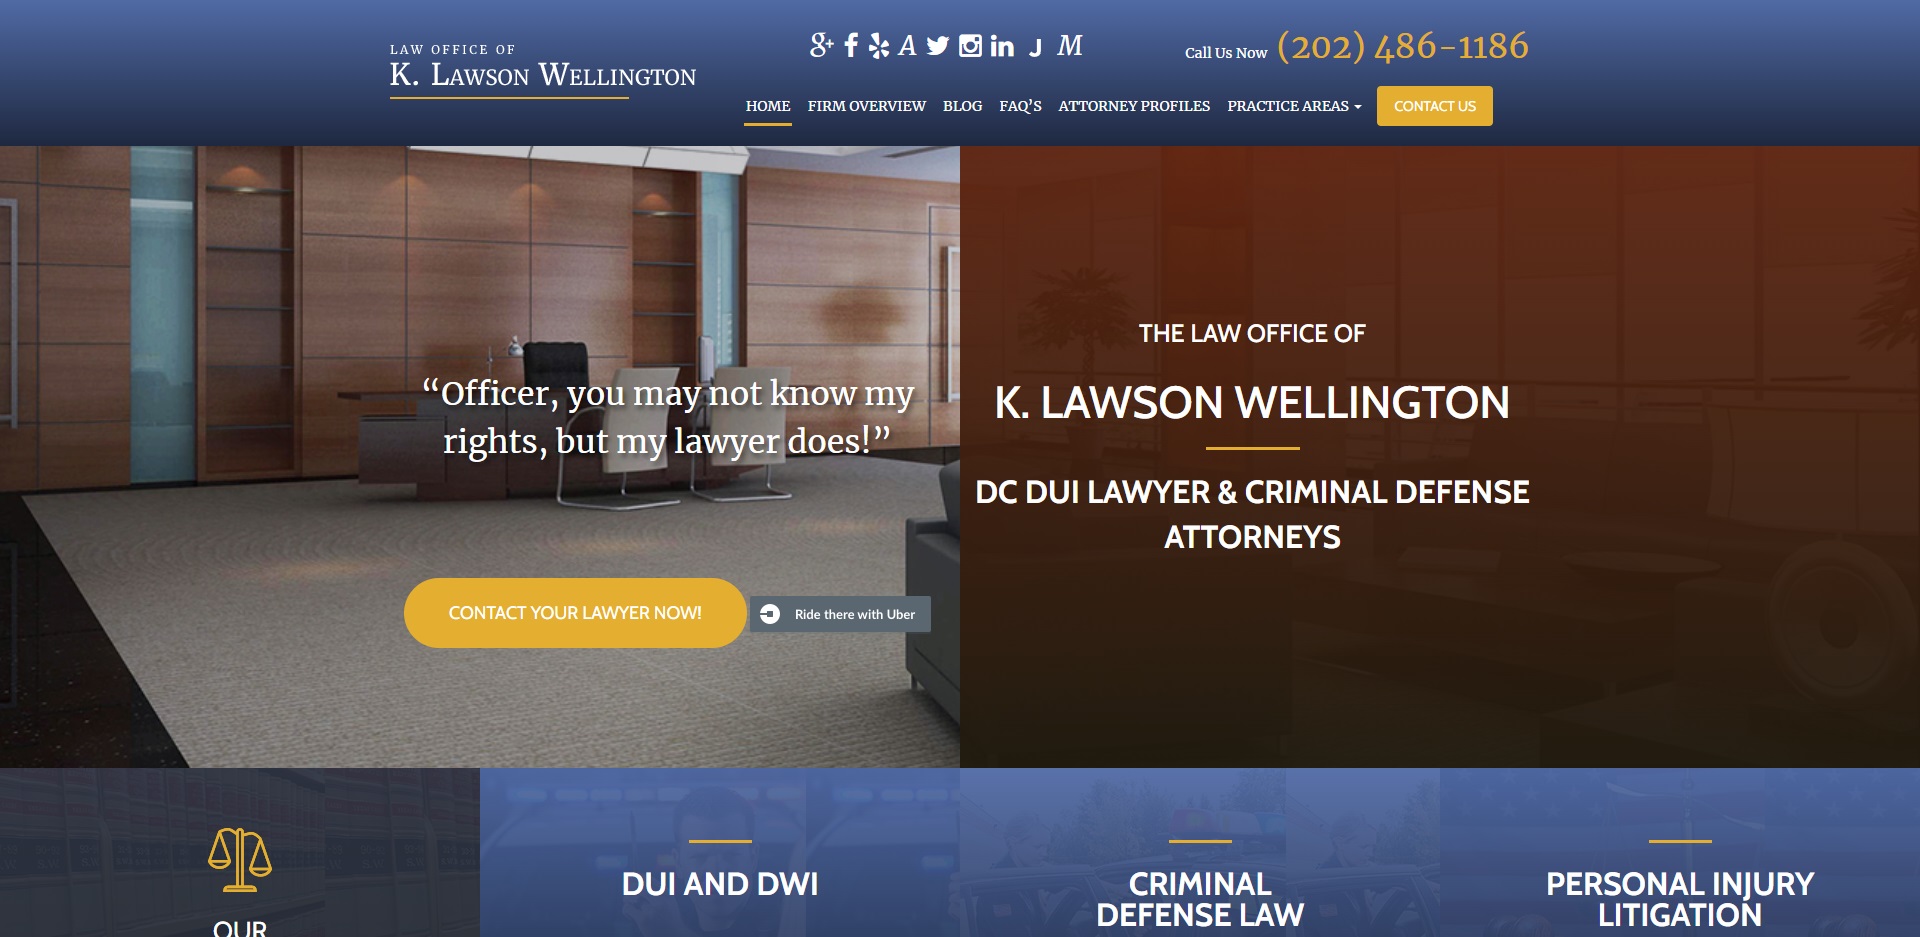 The Best Drink Driving Attorneys in Washington, DC